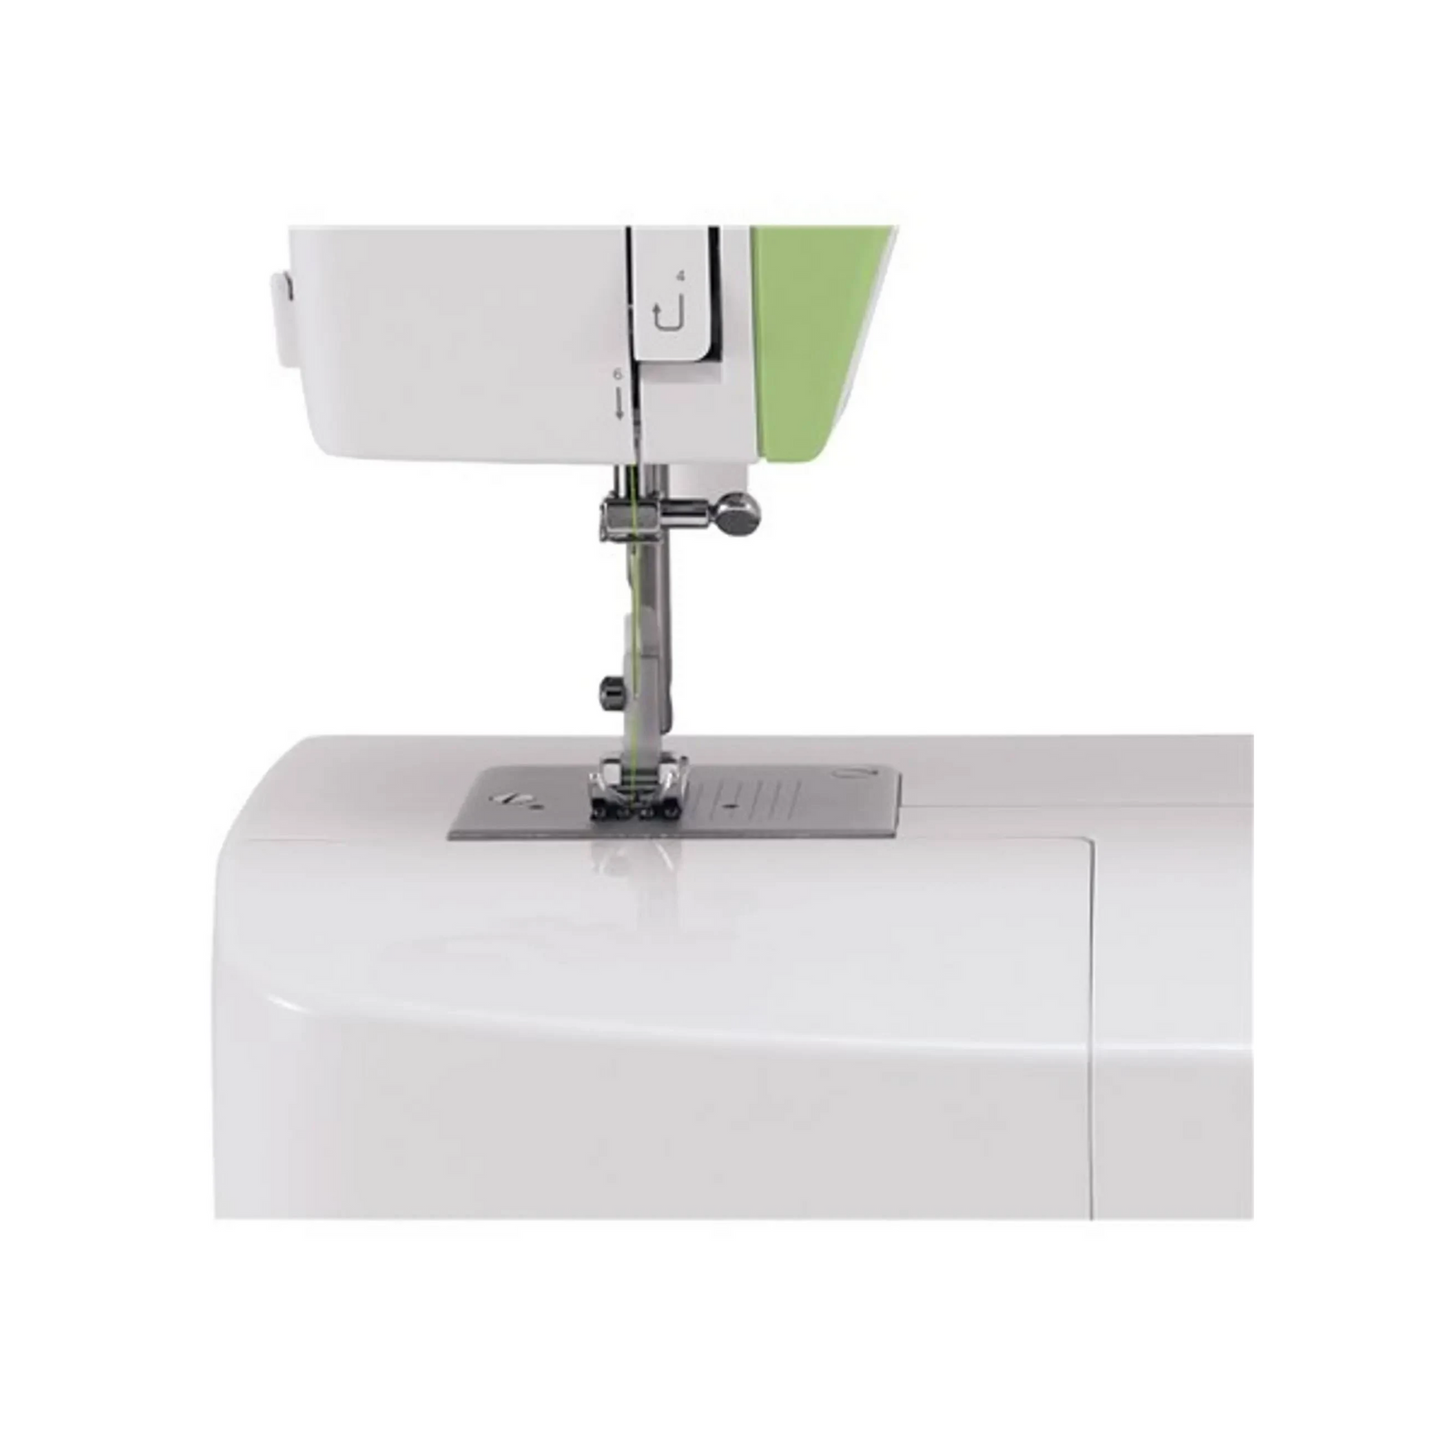 Singer simple 3229 automatic zig-zag electric - Sewing machine - White - green -  Close view